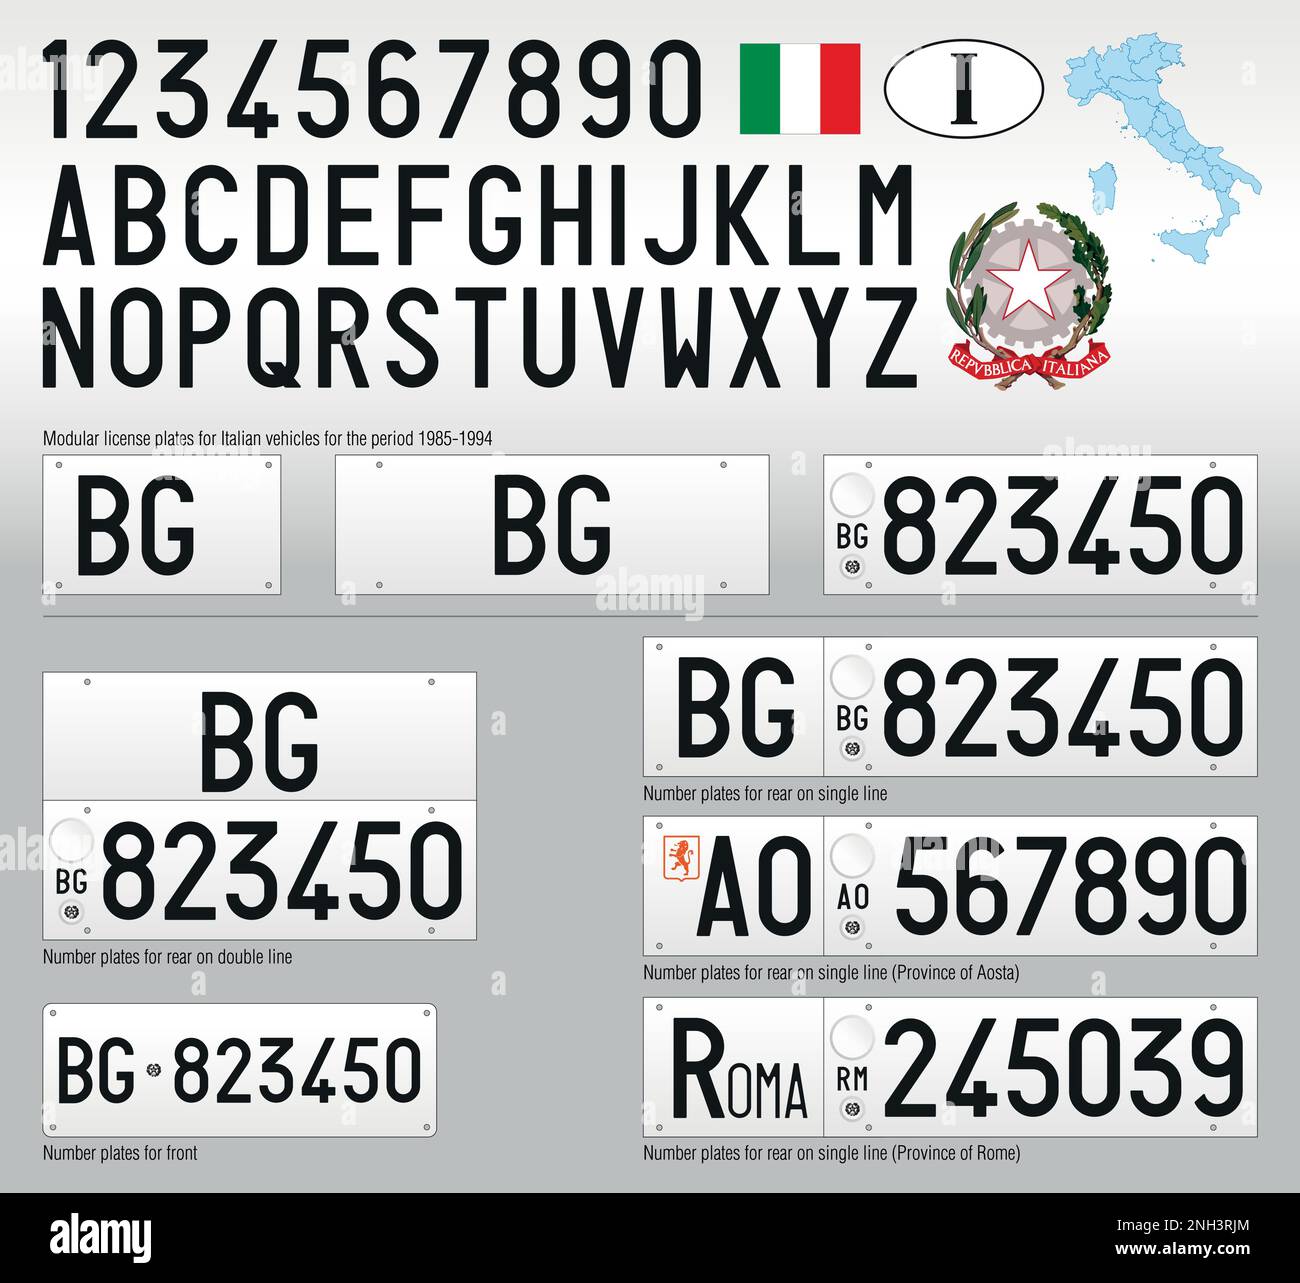 Modular italian vintage car license plate, letters, numbers and symbols, period 1985-1994, vector illustration, Italy Stock Vector